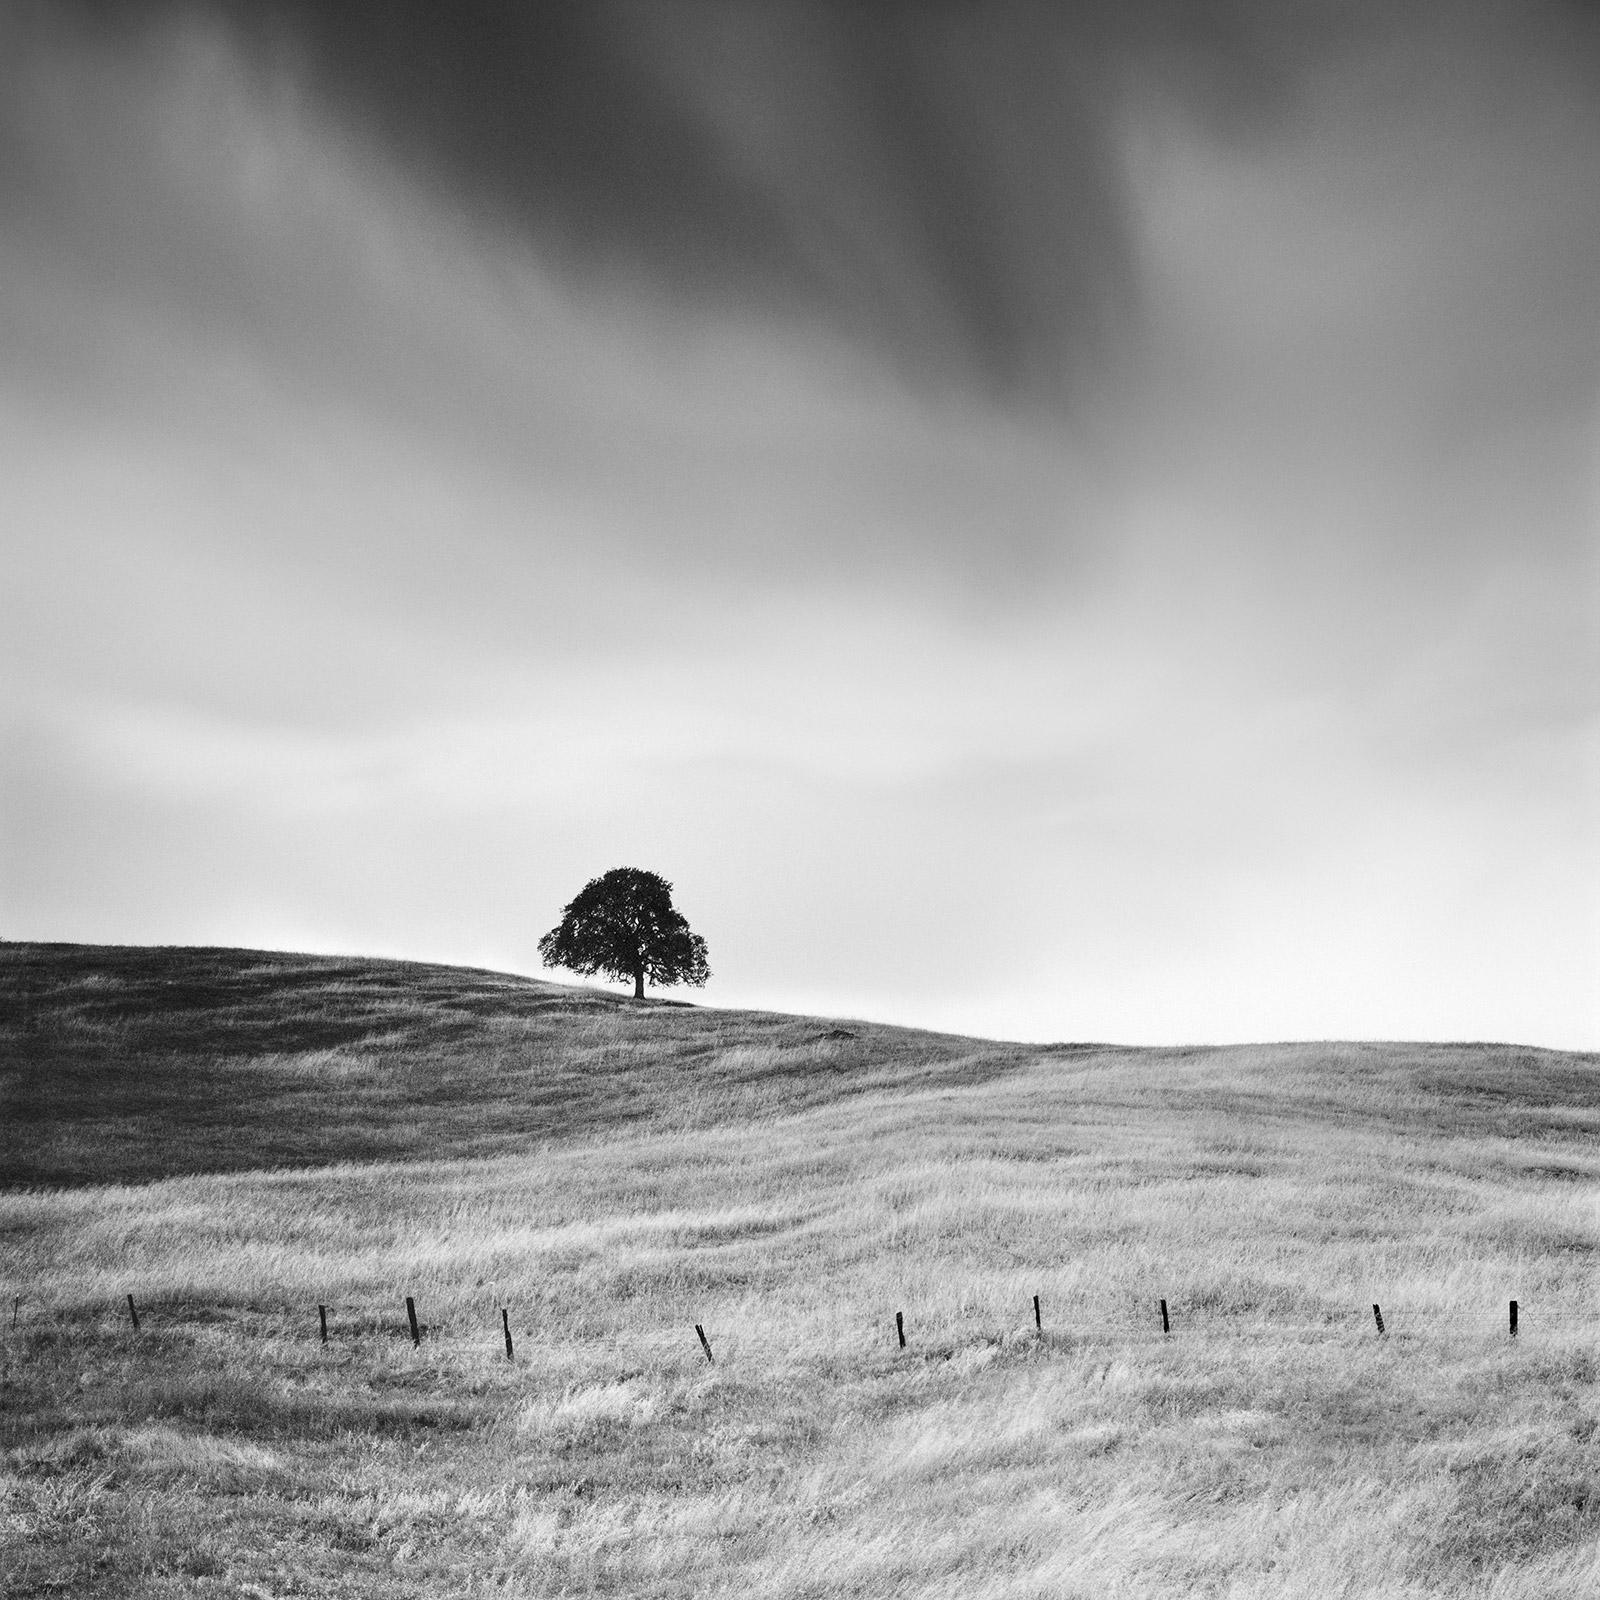 Black and White Photograph Gerald Berghammer - The tree in the golden grass California USA black white art landscape photography